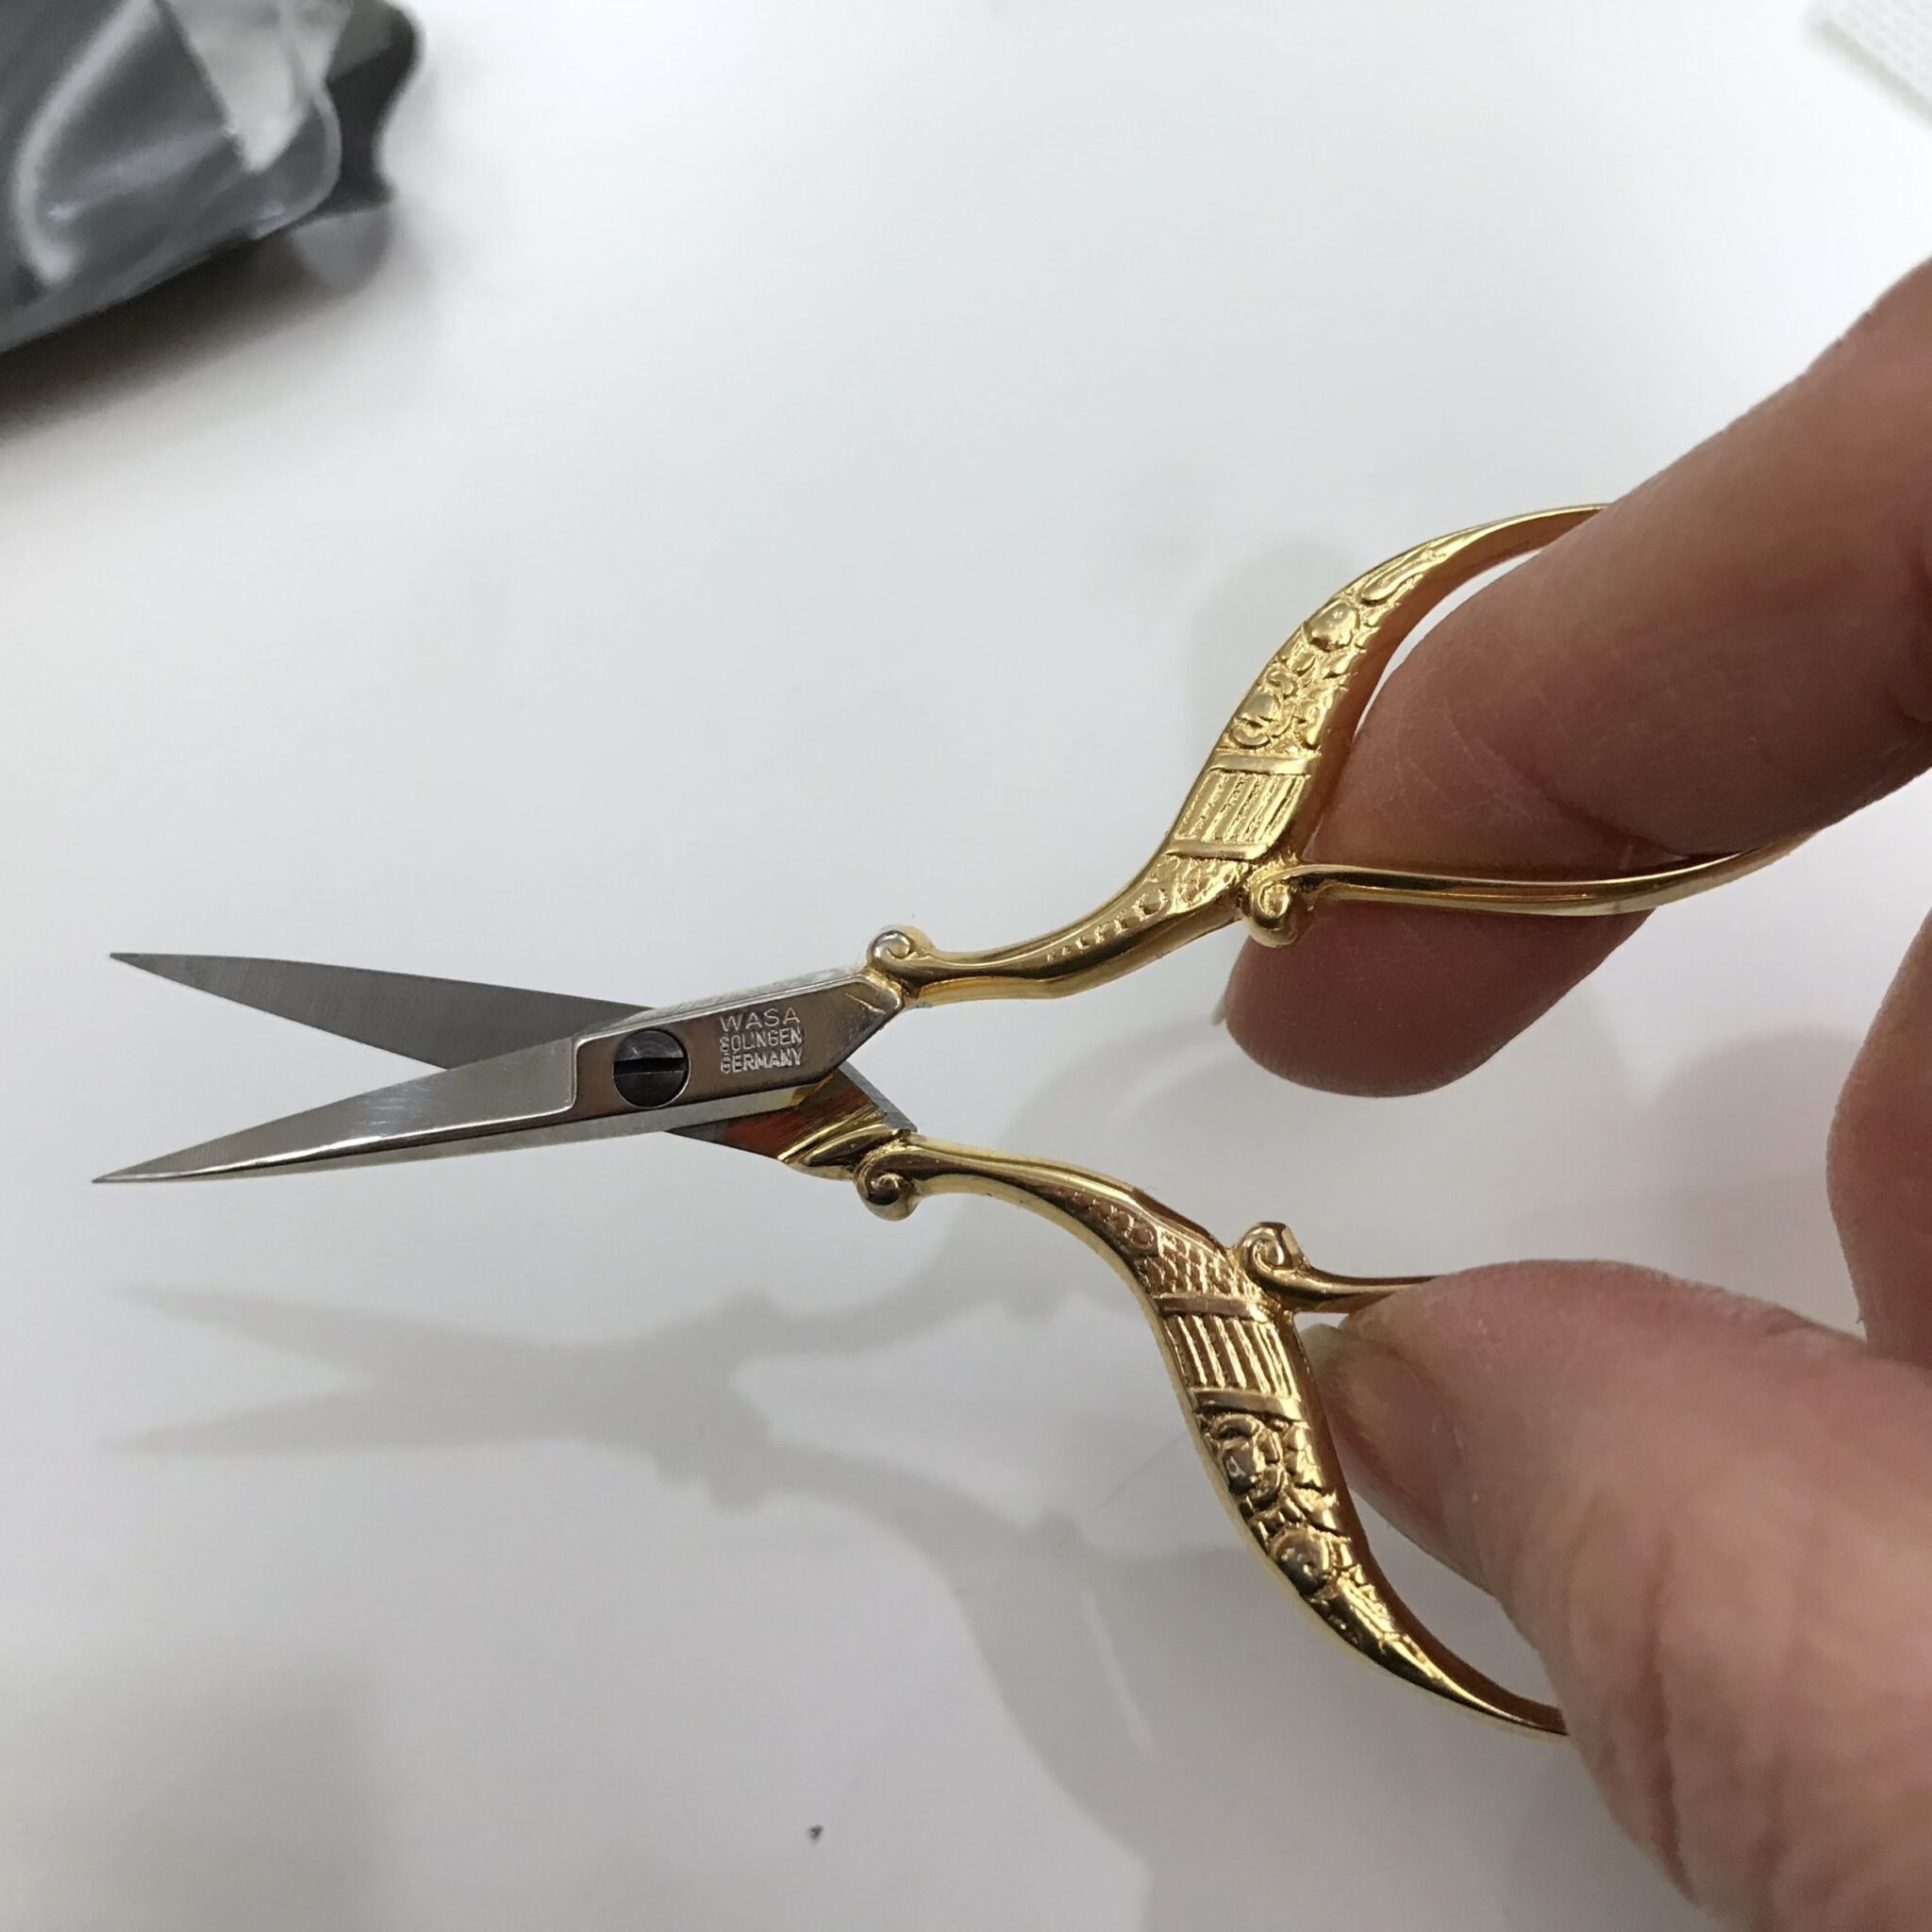 Wasa Solingen Stork Scissors - Gold with Nickel Accents - 3.5 New